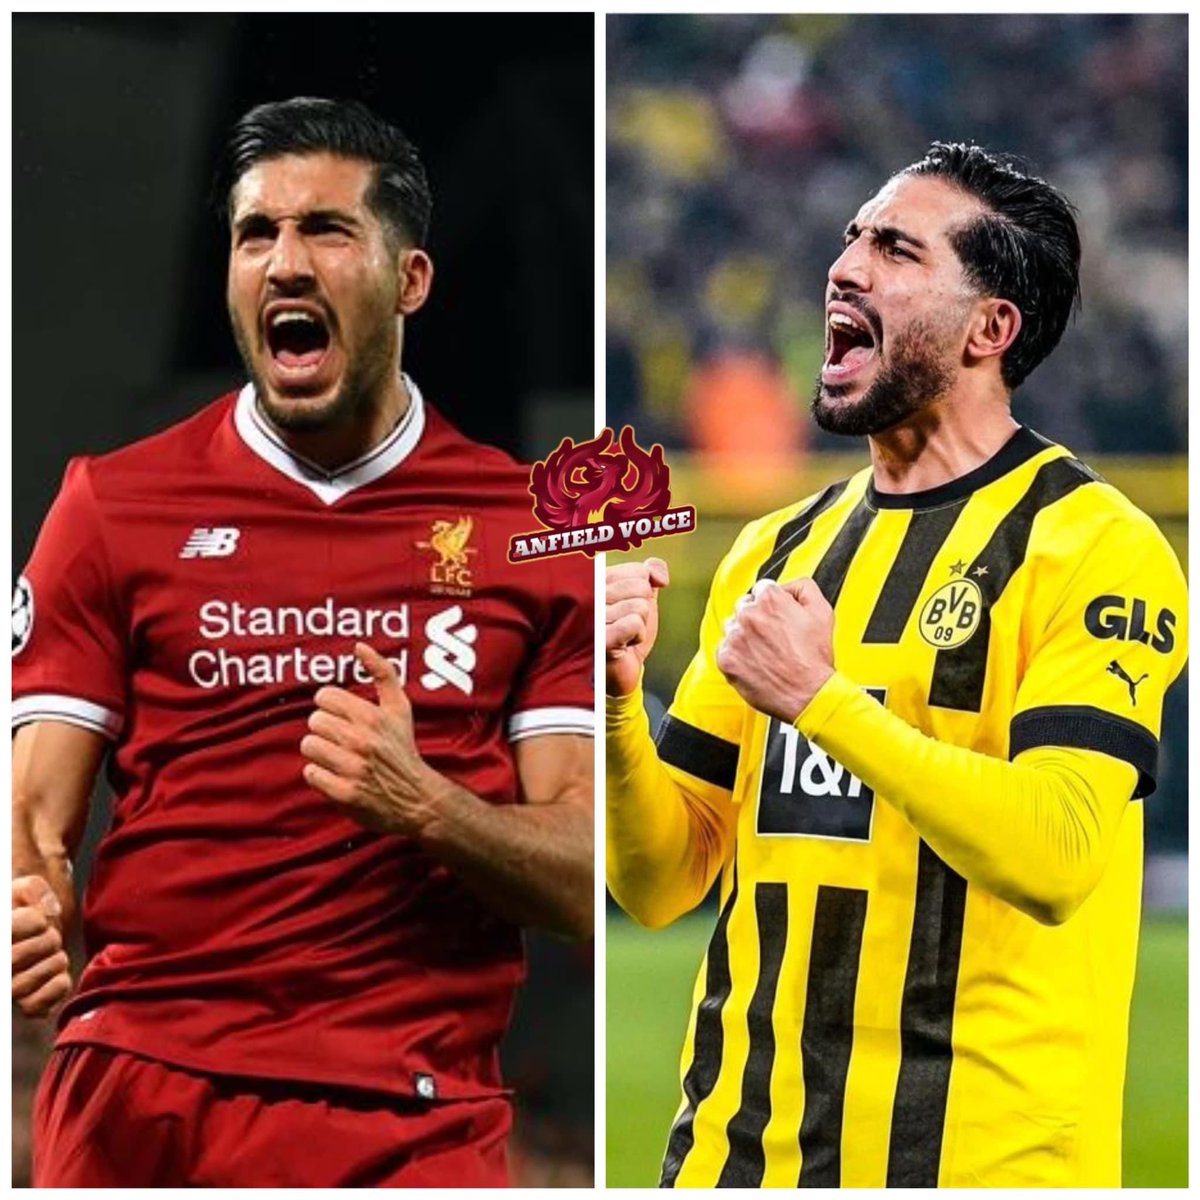 Congratulations to former Red Emre Can for captaining Borussia Dortmund to a Champions League final at Wembley. All the Reds, Jürgen and the BvB family will be behind you lad ❤️ #Dortmund #UCL #LFC